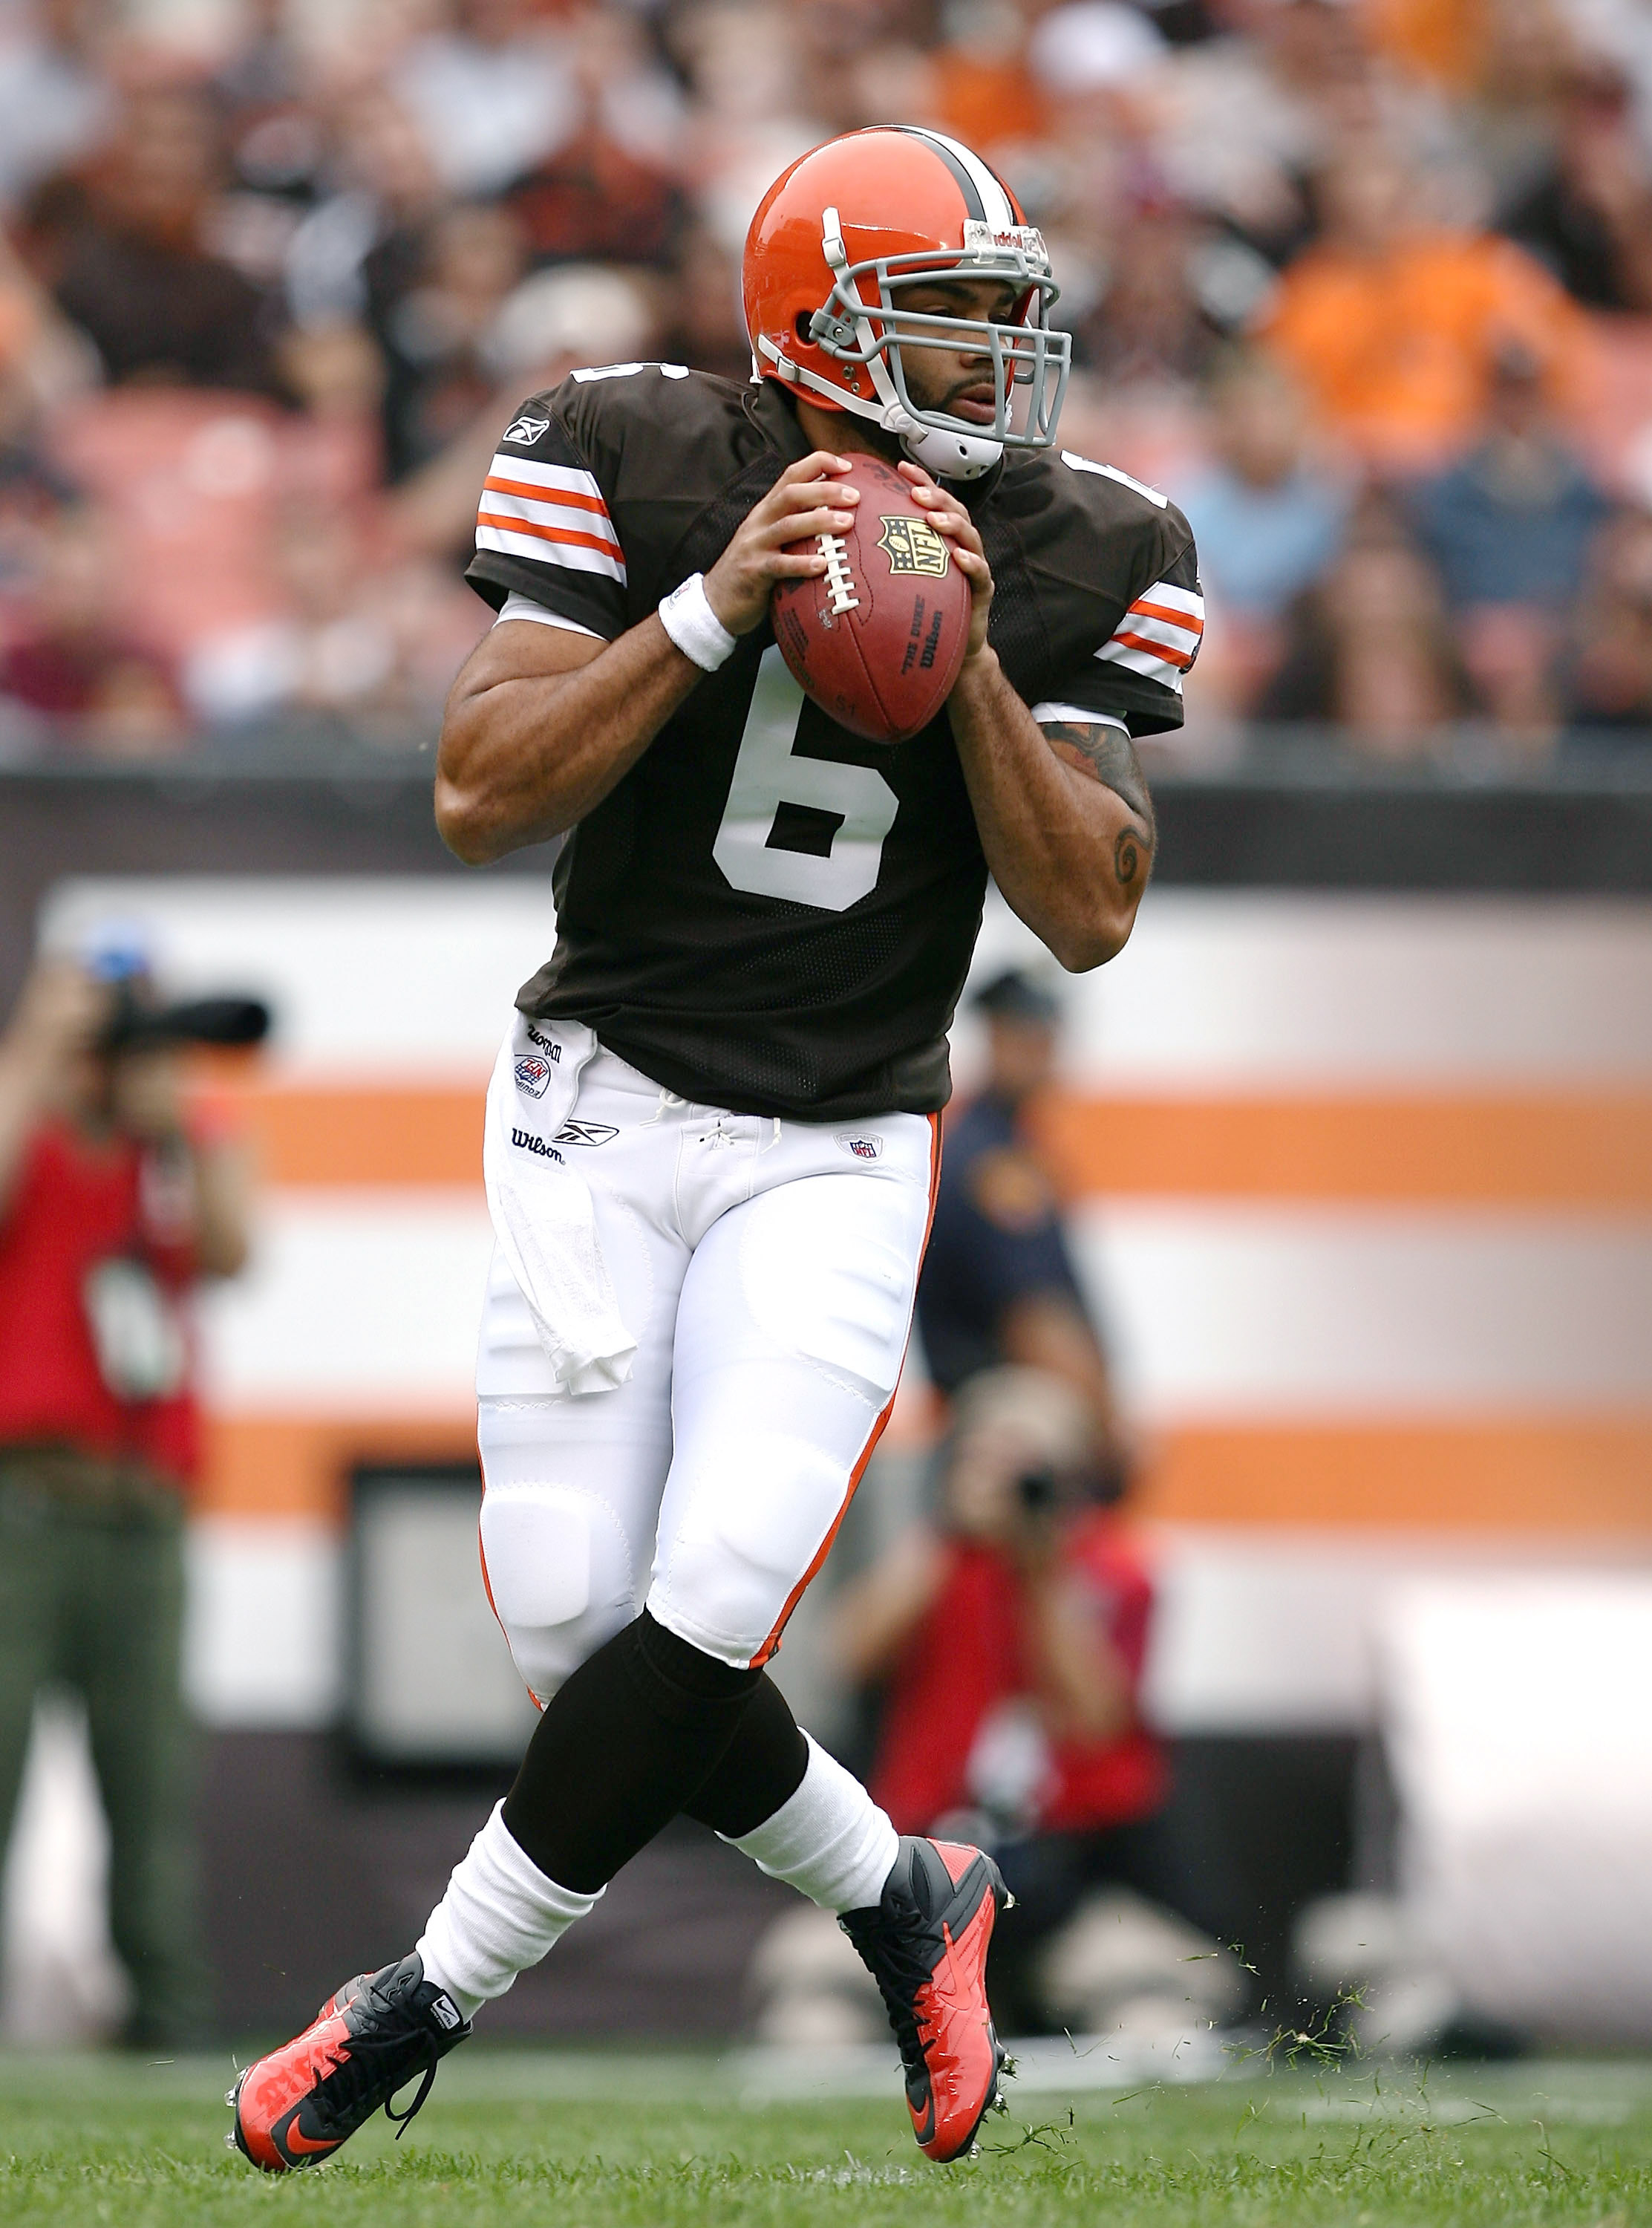 CLEVELAND - SEPTEMBER 19:  Quarterback Seneca Wallace #6 of the Cleveland Browns looks for a receiver against the Kansas City Chiefs at Cleveland Browns Stadium on September 19, 2010 in Cleveland, Ohio.  (Photo by Matt Sullivan/Getty Images)